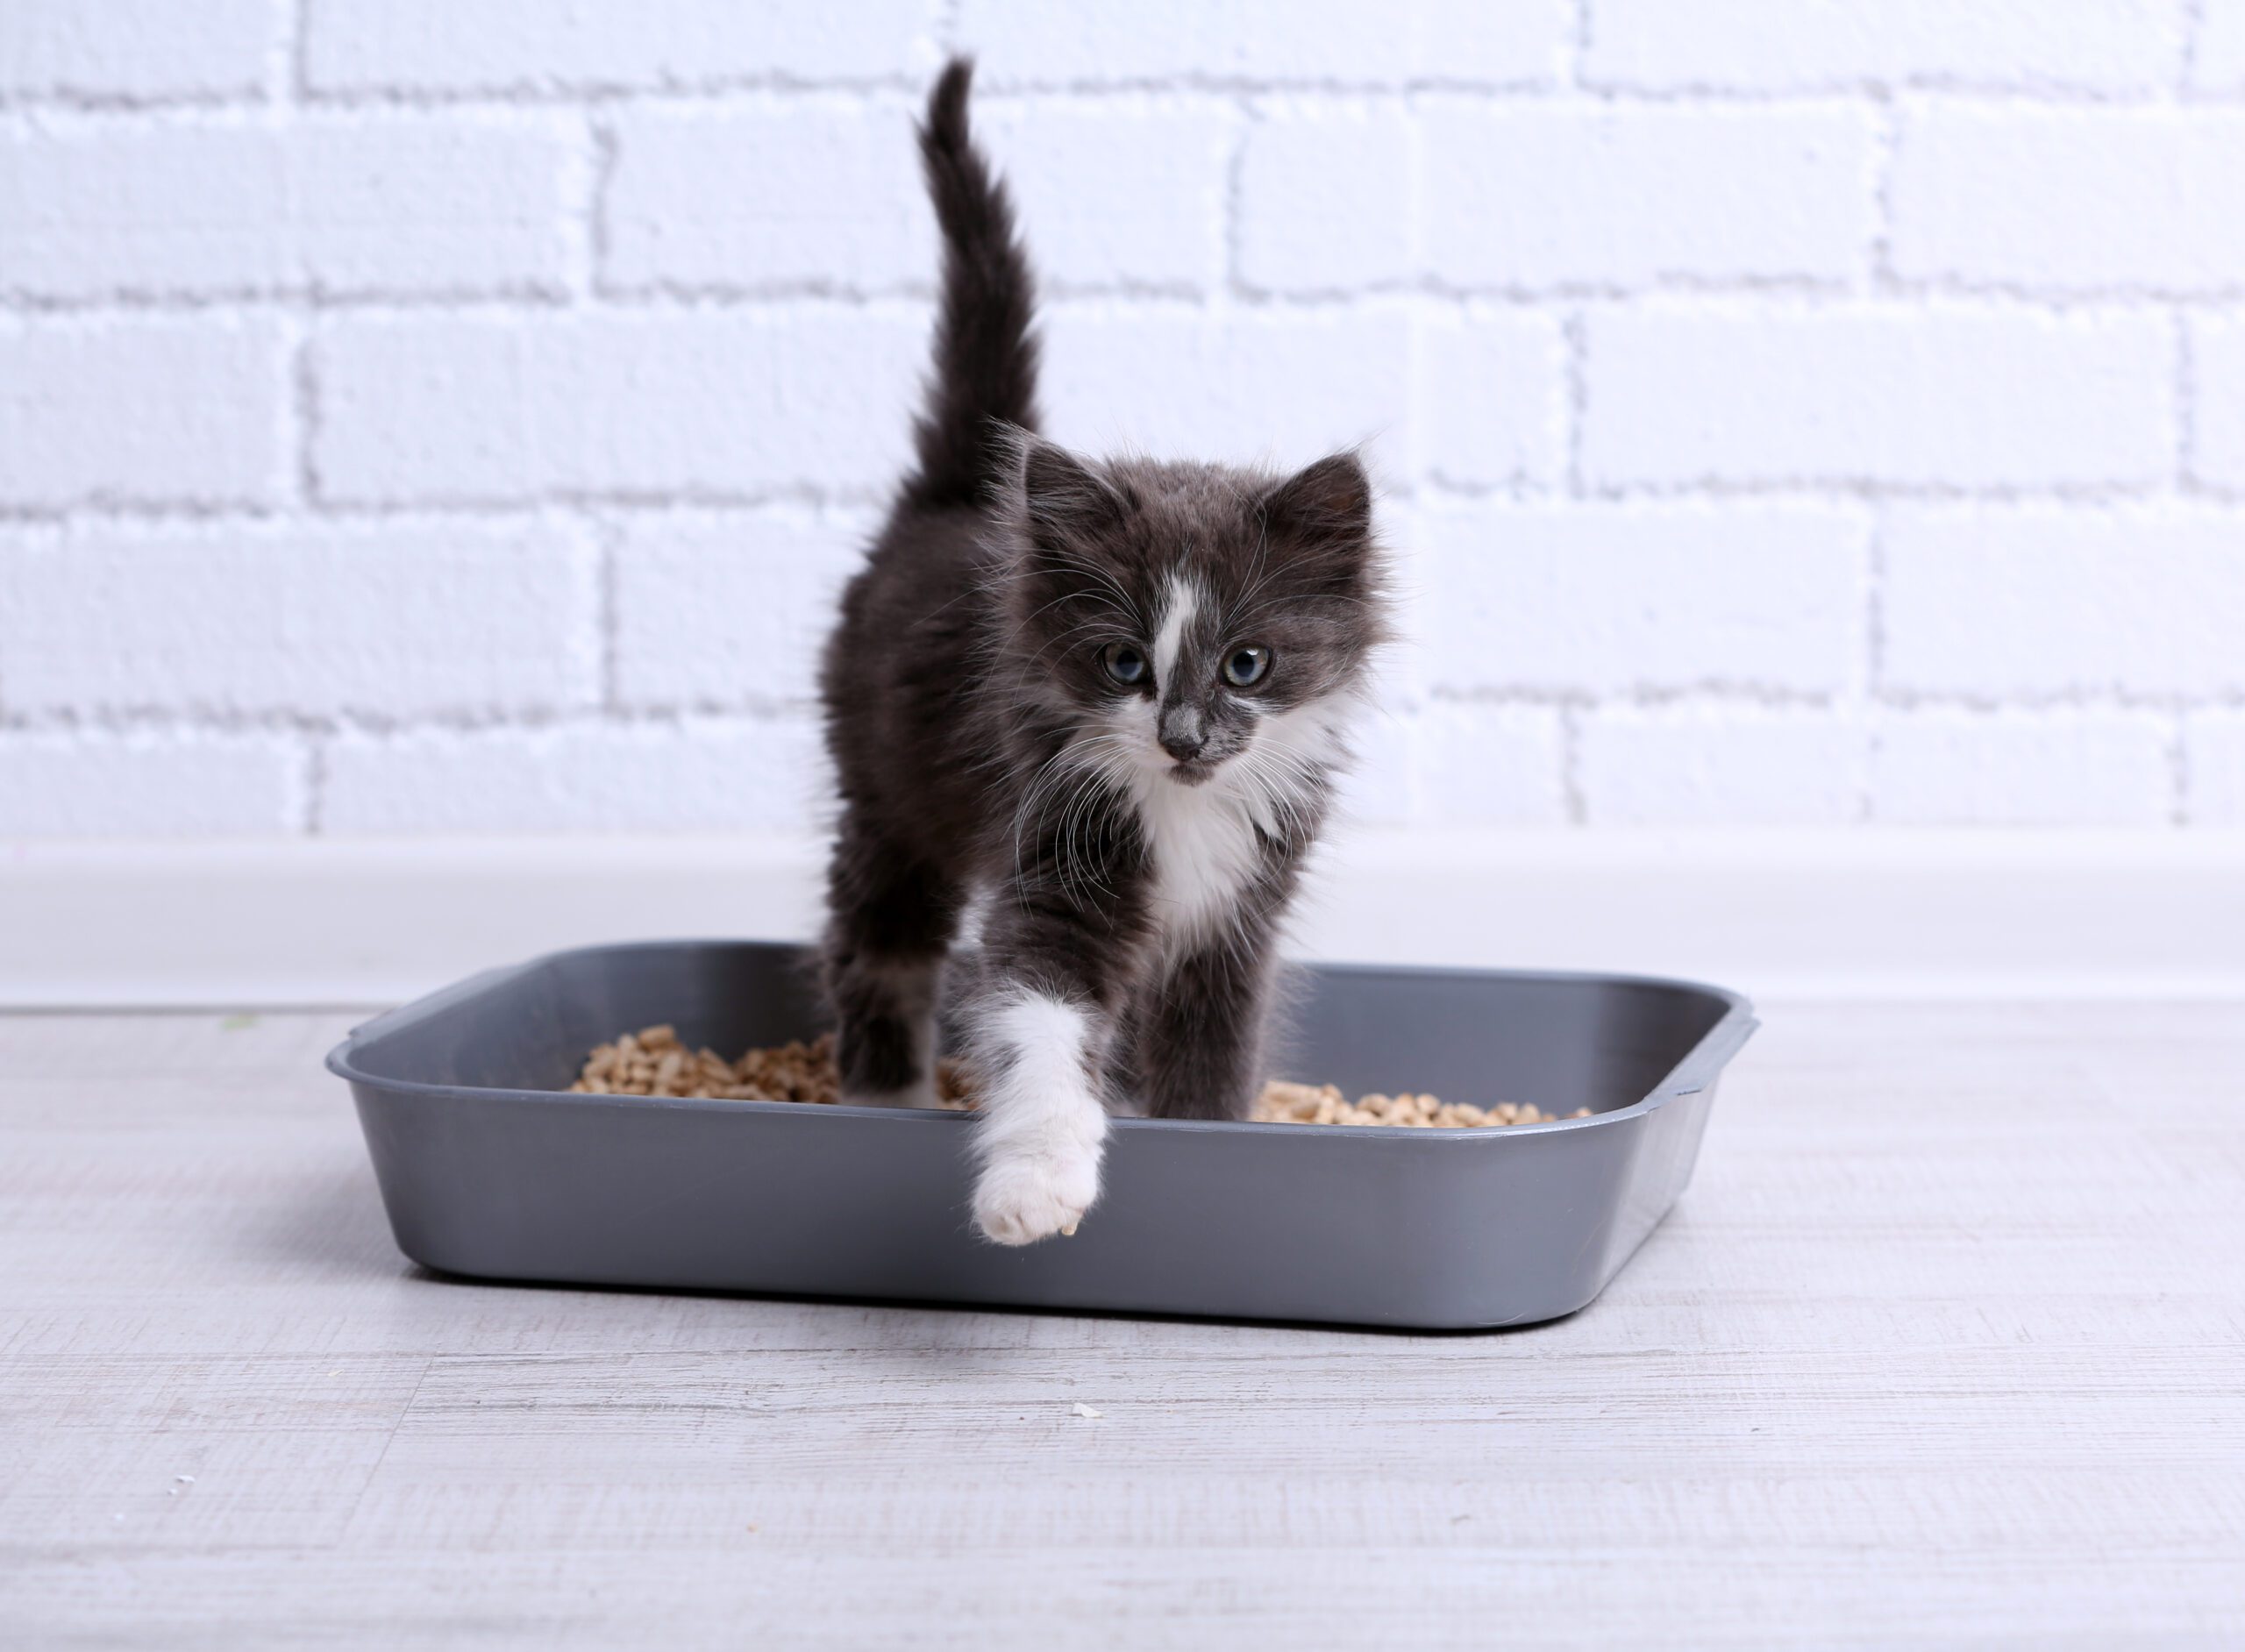 Kitten stepping out of its litter box, Fret not! This blog will guide you through the process of choosing litter that's perfect for your new kitten.